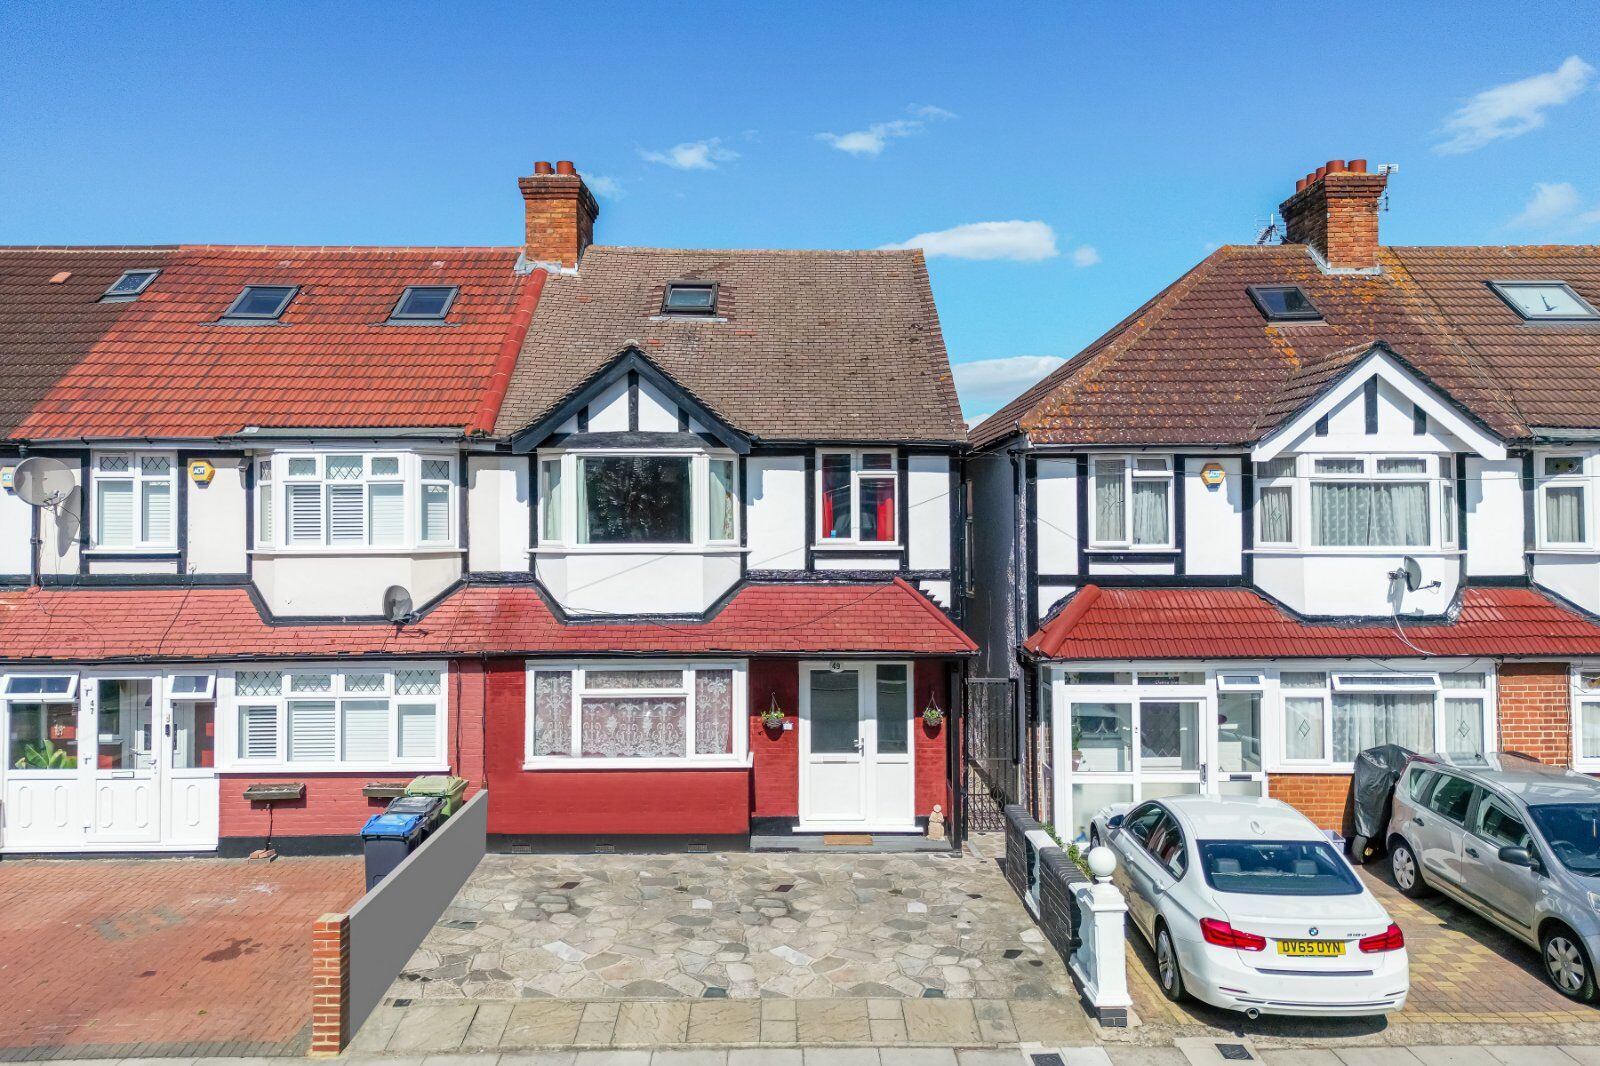 4 bedroom end terraced house for sale Dahlia Gardens, Mitcham, CR4, main image